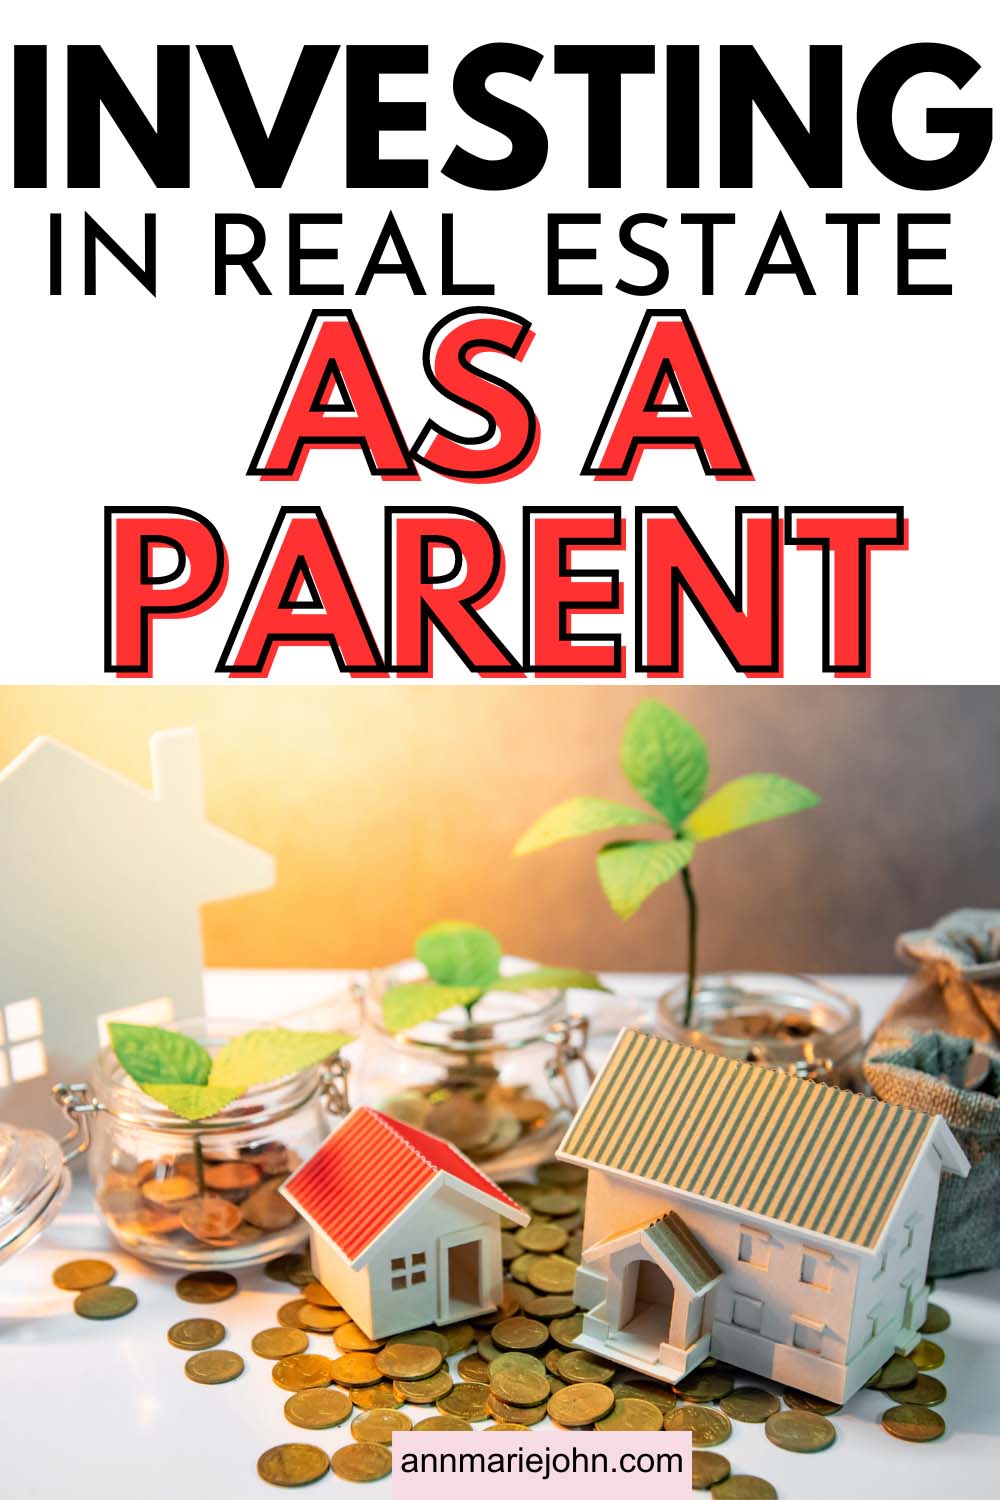 Investing In Real Estate as a Parent